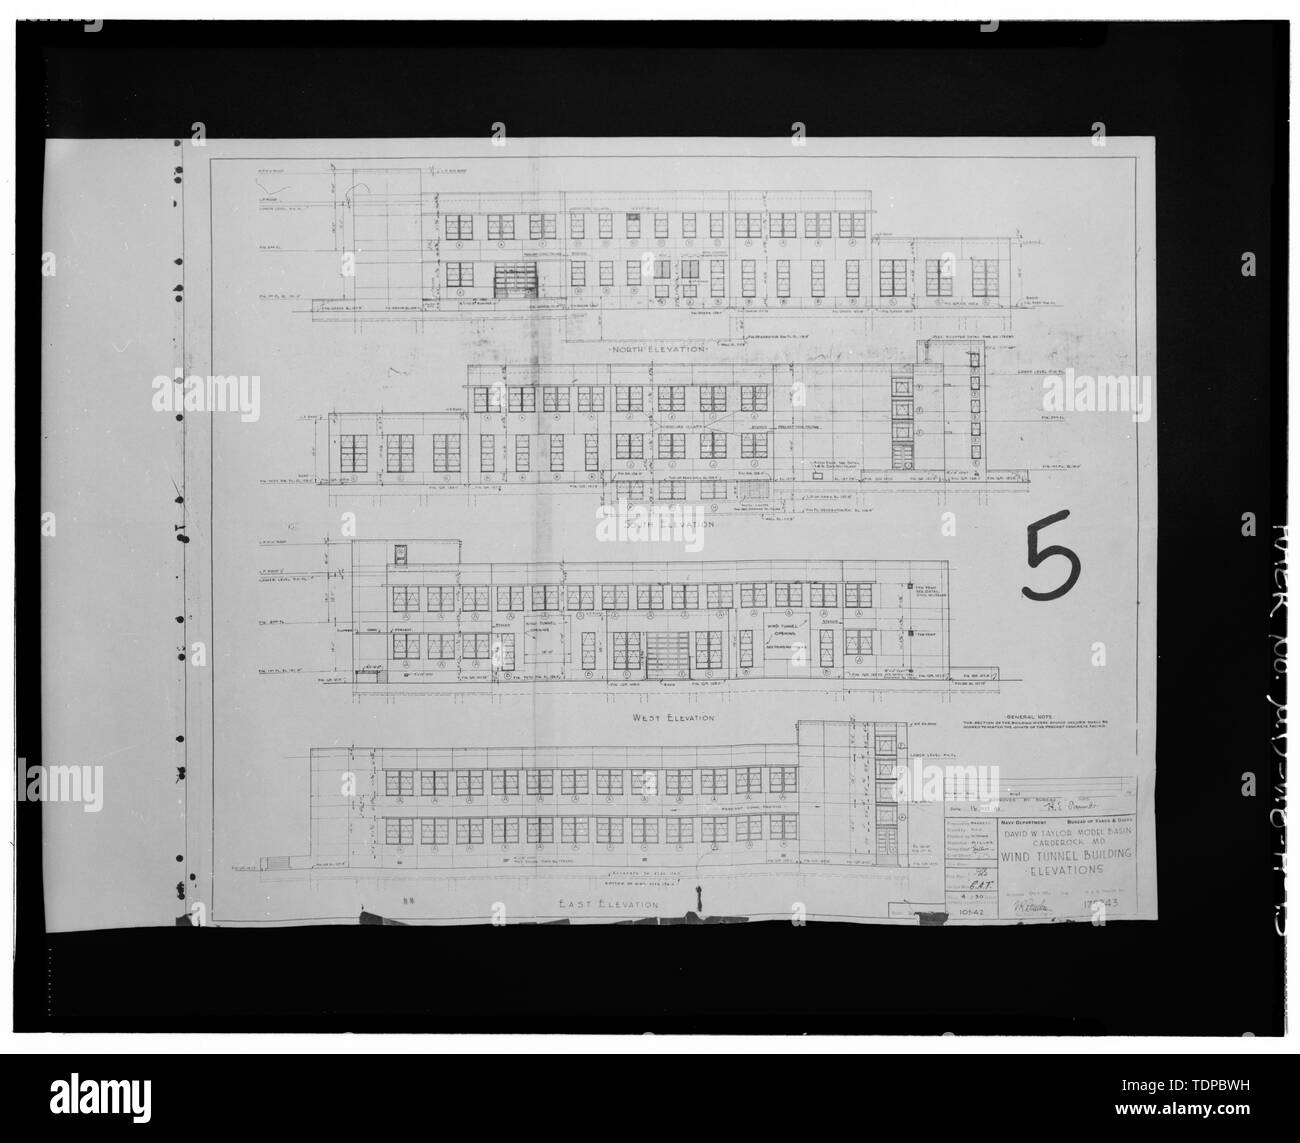 Photocopy of drawing (original in possession of Naval Surface Warfare Center Carderock Division, Bethesda, MD) WIND TUNNEL BUILDING, ELEVATIONS, 1941 - Naval Surface Warfare Center, Subsonic Wind Tunnel Building, Bounded by Clara Barton Parkway and McArthur Boulevard, Silver Spring, Montgomery County, MD; U.S. Department of the Navy; R. Christopher Goodwin and Associates, Incorporated, contractor; Melhuish, Geoffrey Eden, project manager; Wise, Harriet, photographer Stock Photo